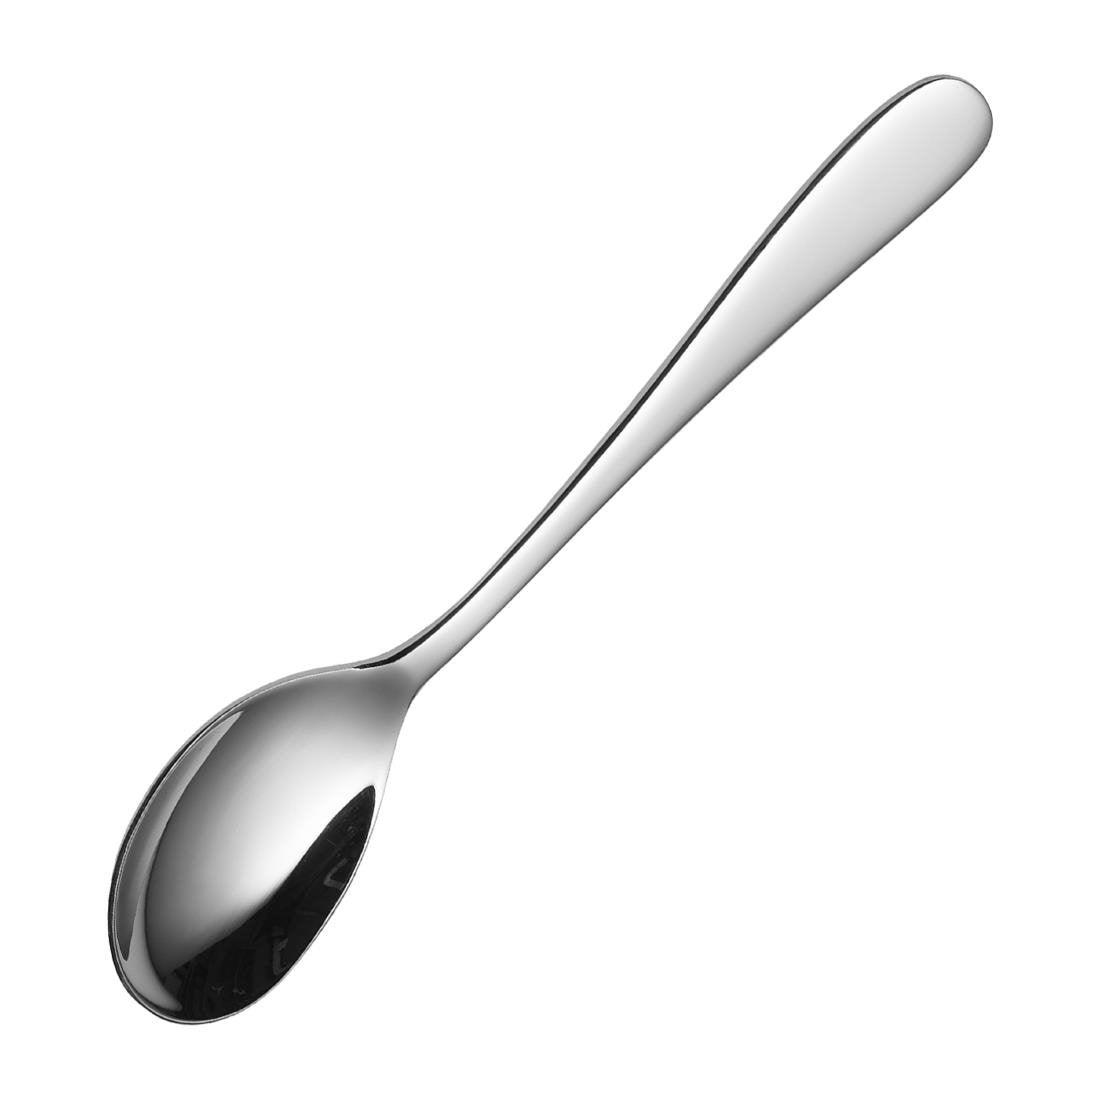 Sola Oasis Dessert Spoon Silver 18/10 Stainless Steel 3.5mm, Length 195mm - Pack of 12